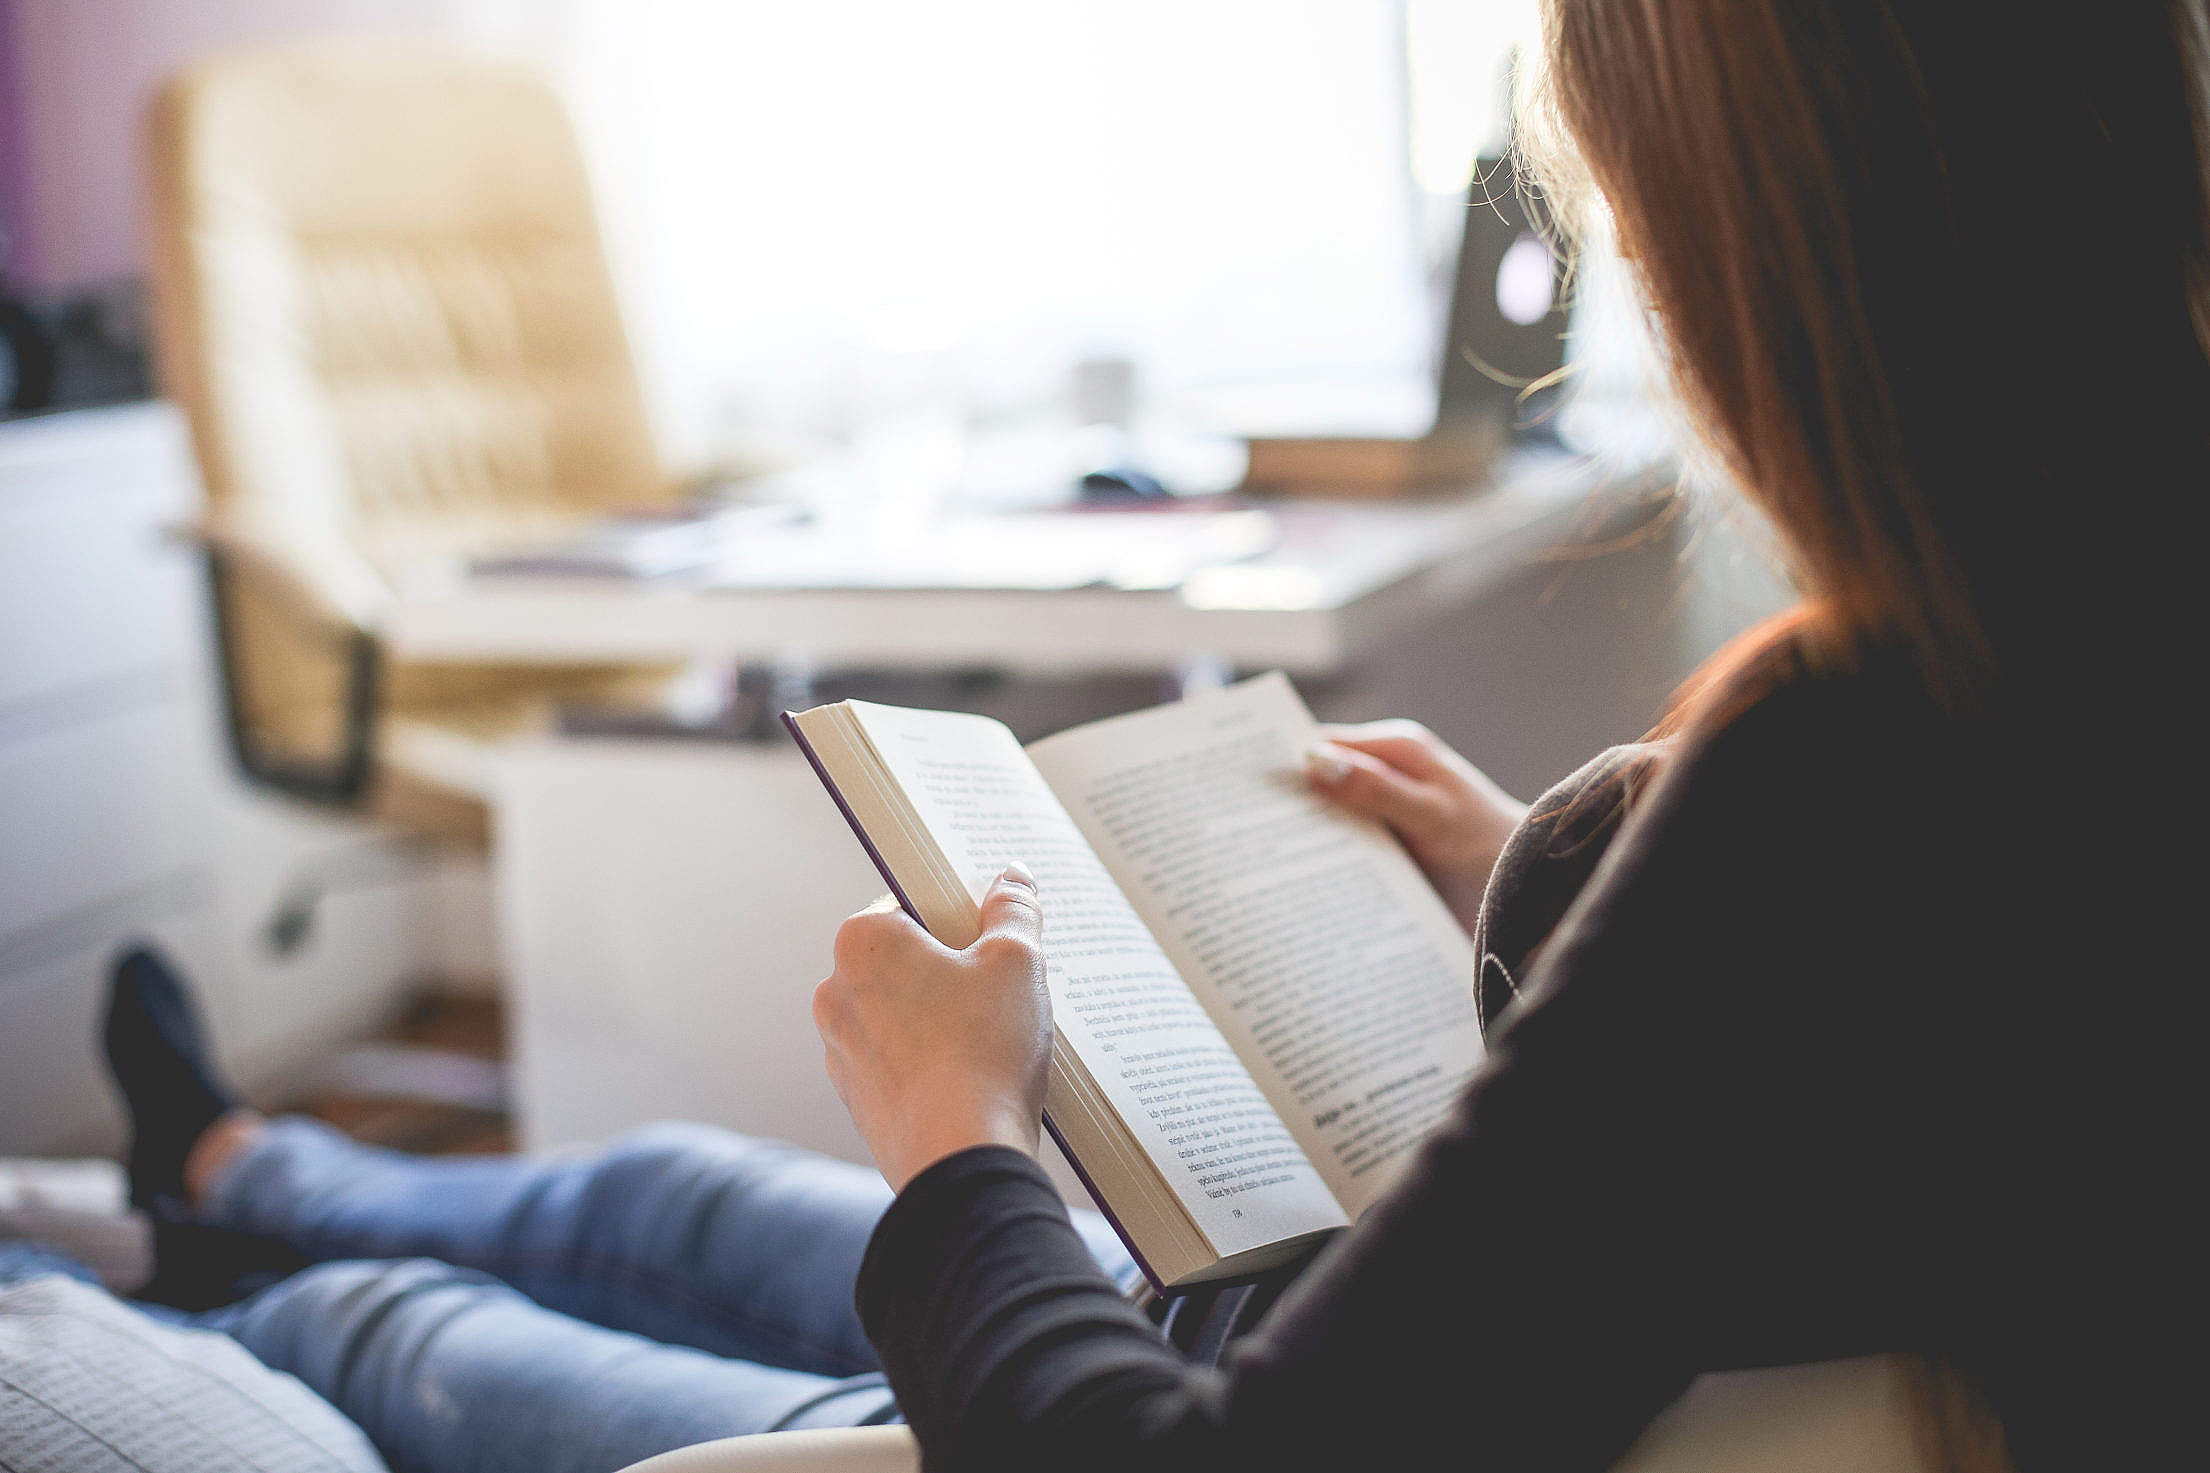 Girl Reading a Book at Home Free Stock Photo Download | picjumbo